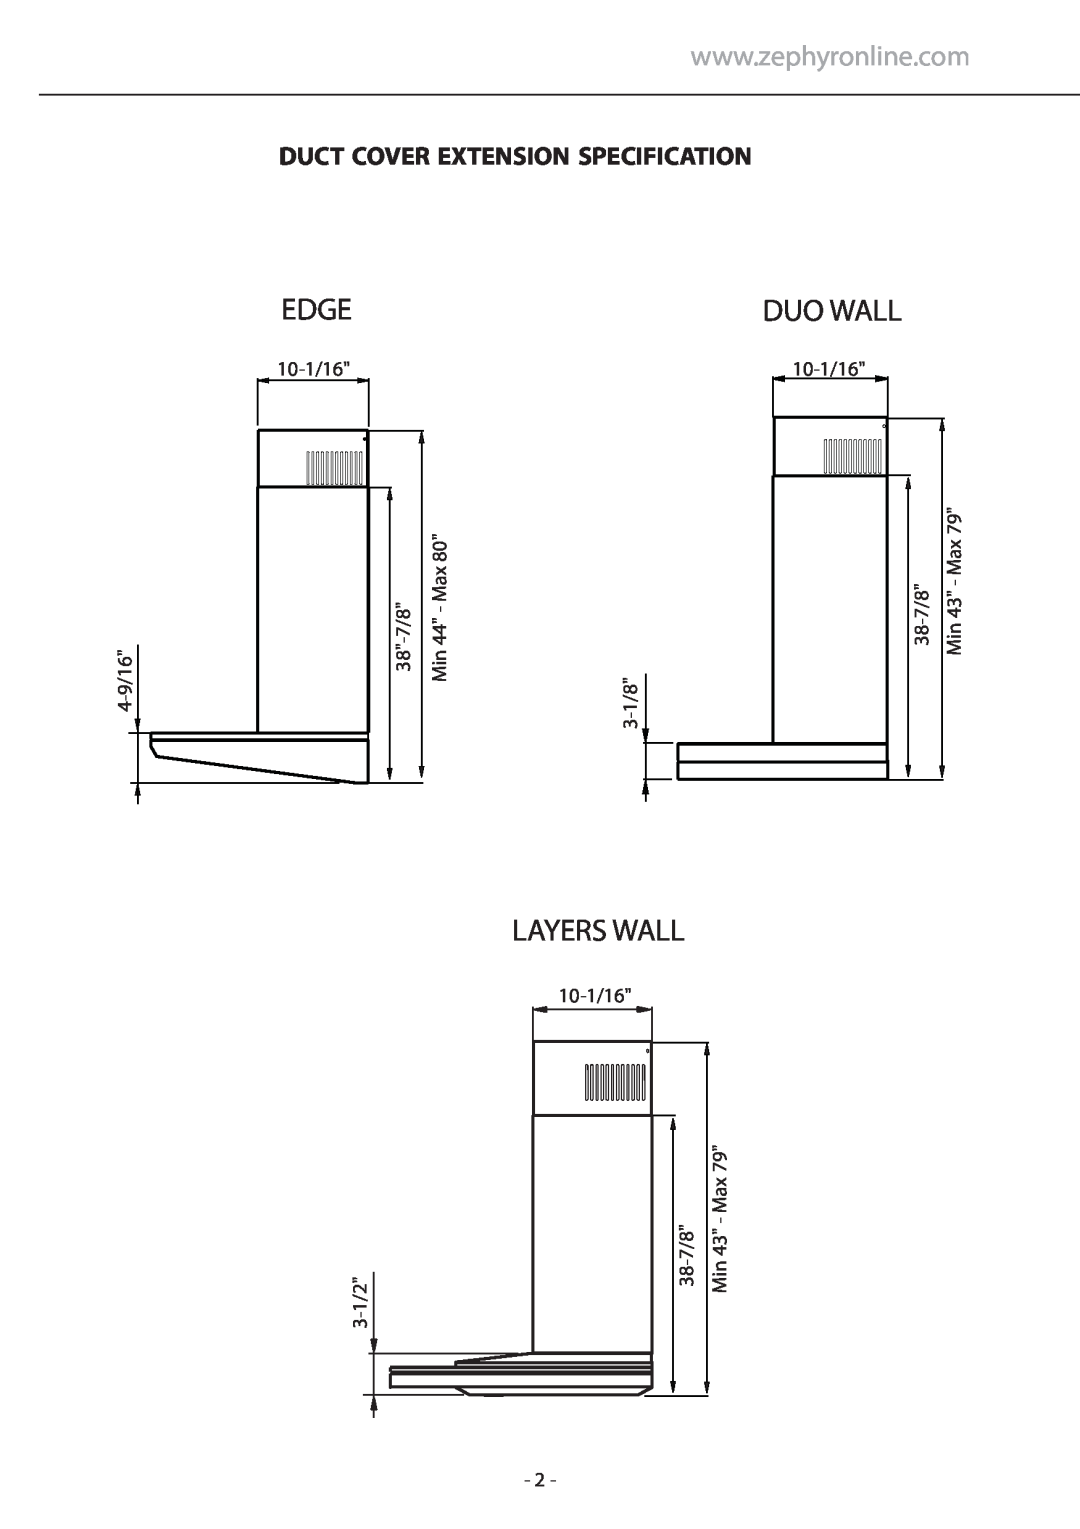 Zephyr Z1C-00LA Duct Cover Extension Specification, Edge, Layers Wall, Duo Wall, 4-9/16, 10-1/16, 38-7/8, Min 44 - Max 